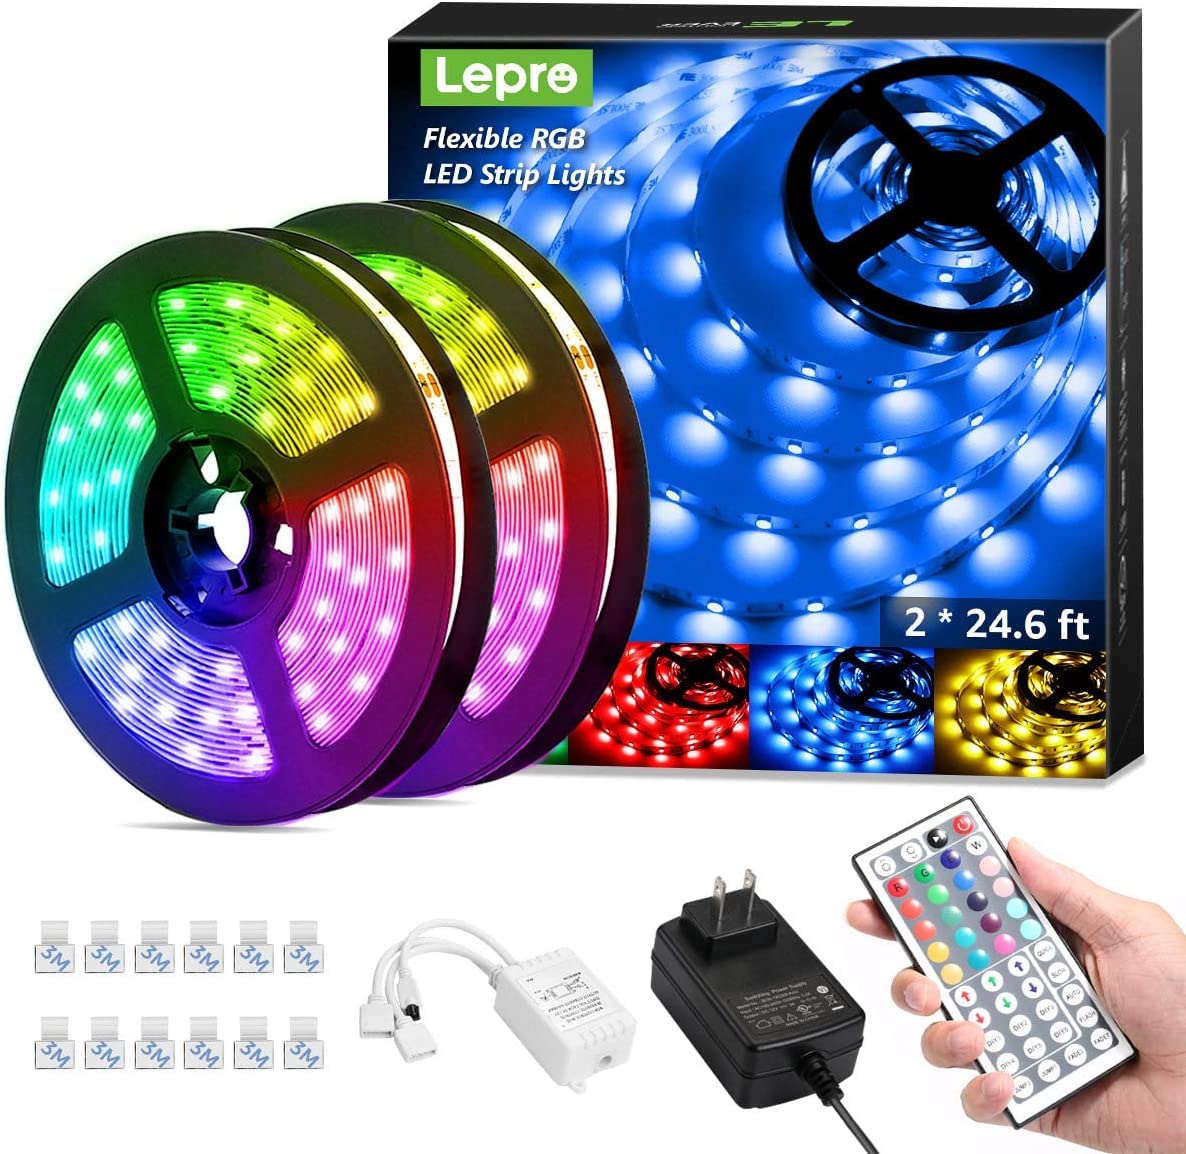 Lepro 50ft LED Strip Light, Ultra-Long RGB 5050 LED Strips with Remote Controller and Fixing Clips, Color Changing Tape Light with 12V ETL Listed Adapter for Bedroom, Room, Kitchen, Bar(2 X 24.6FT)